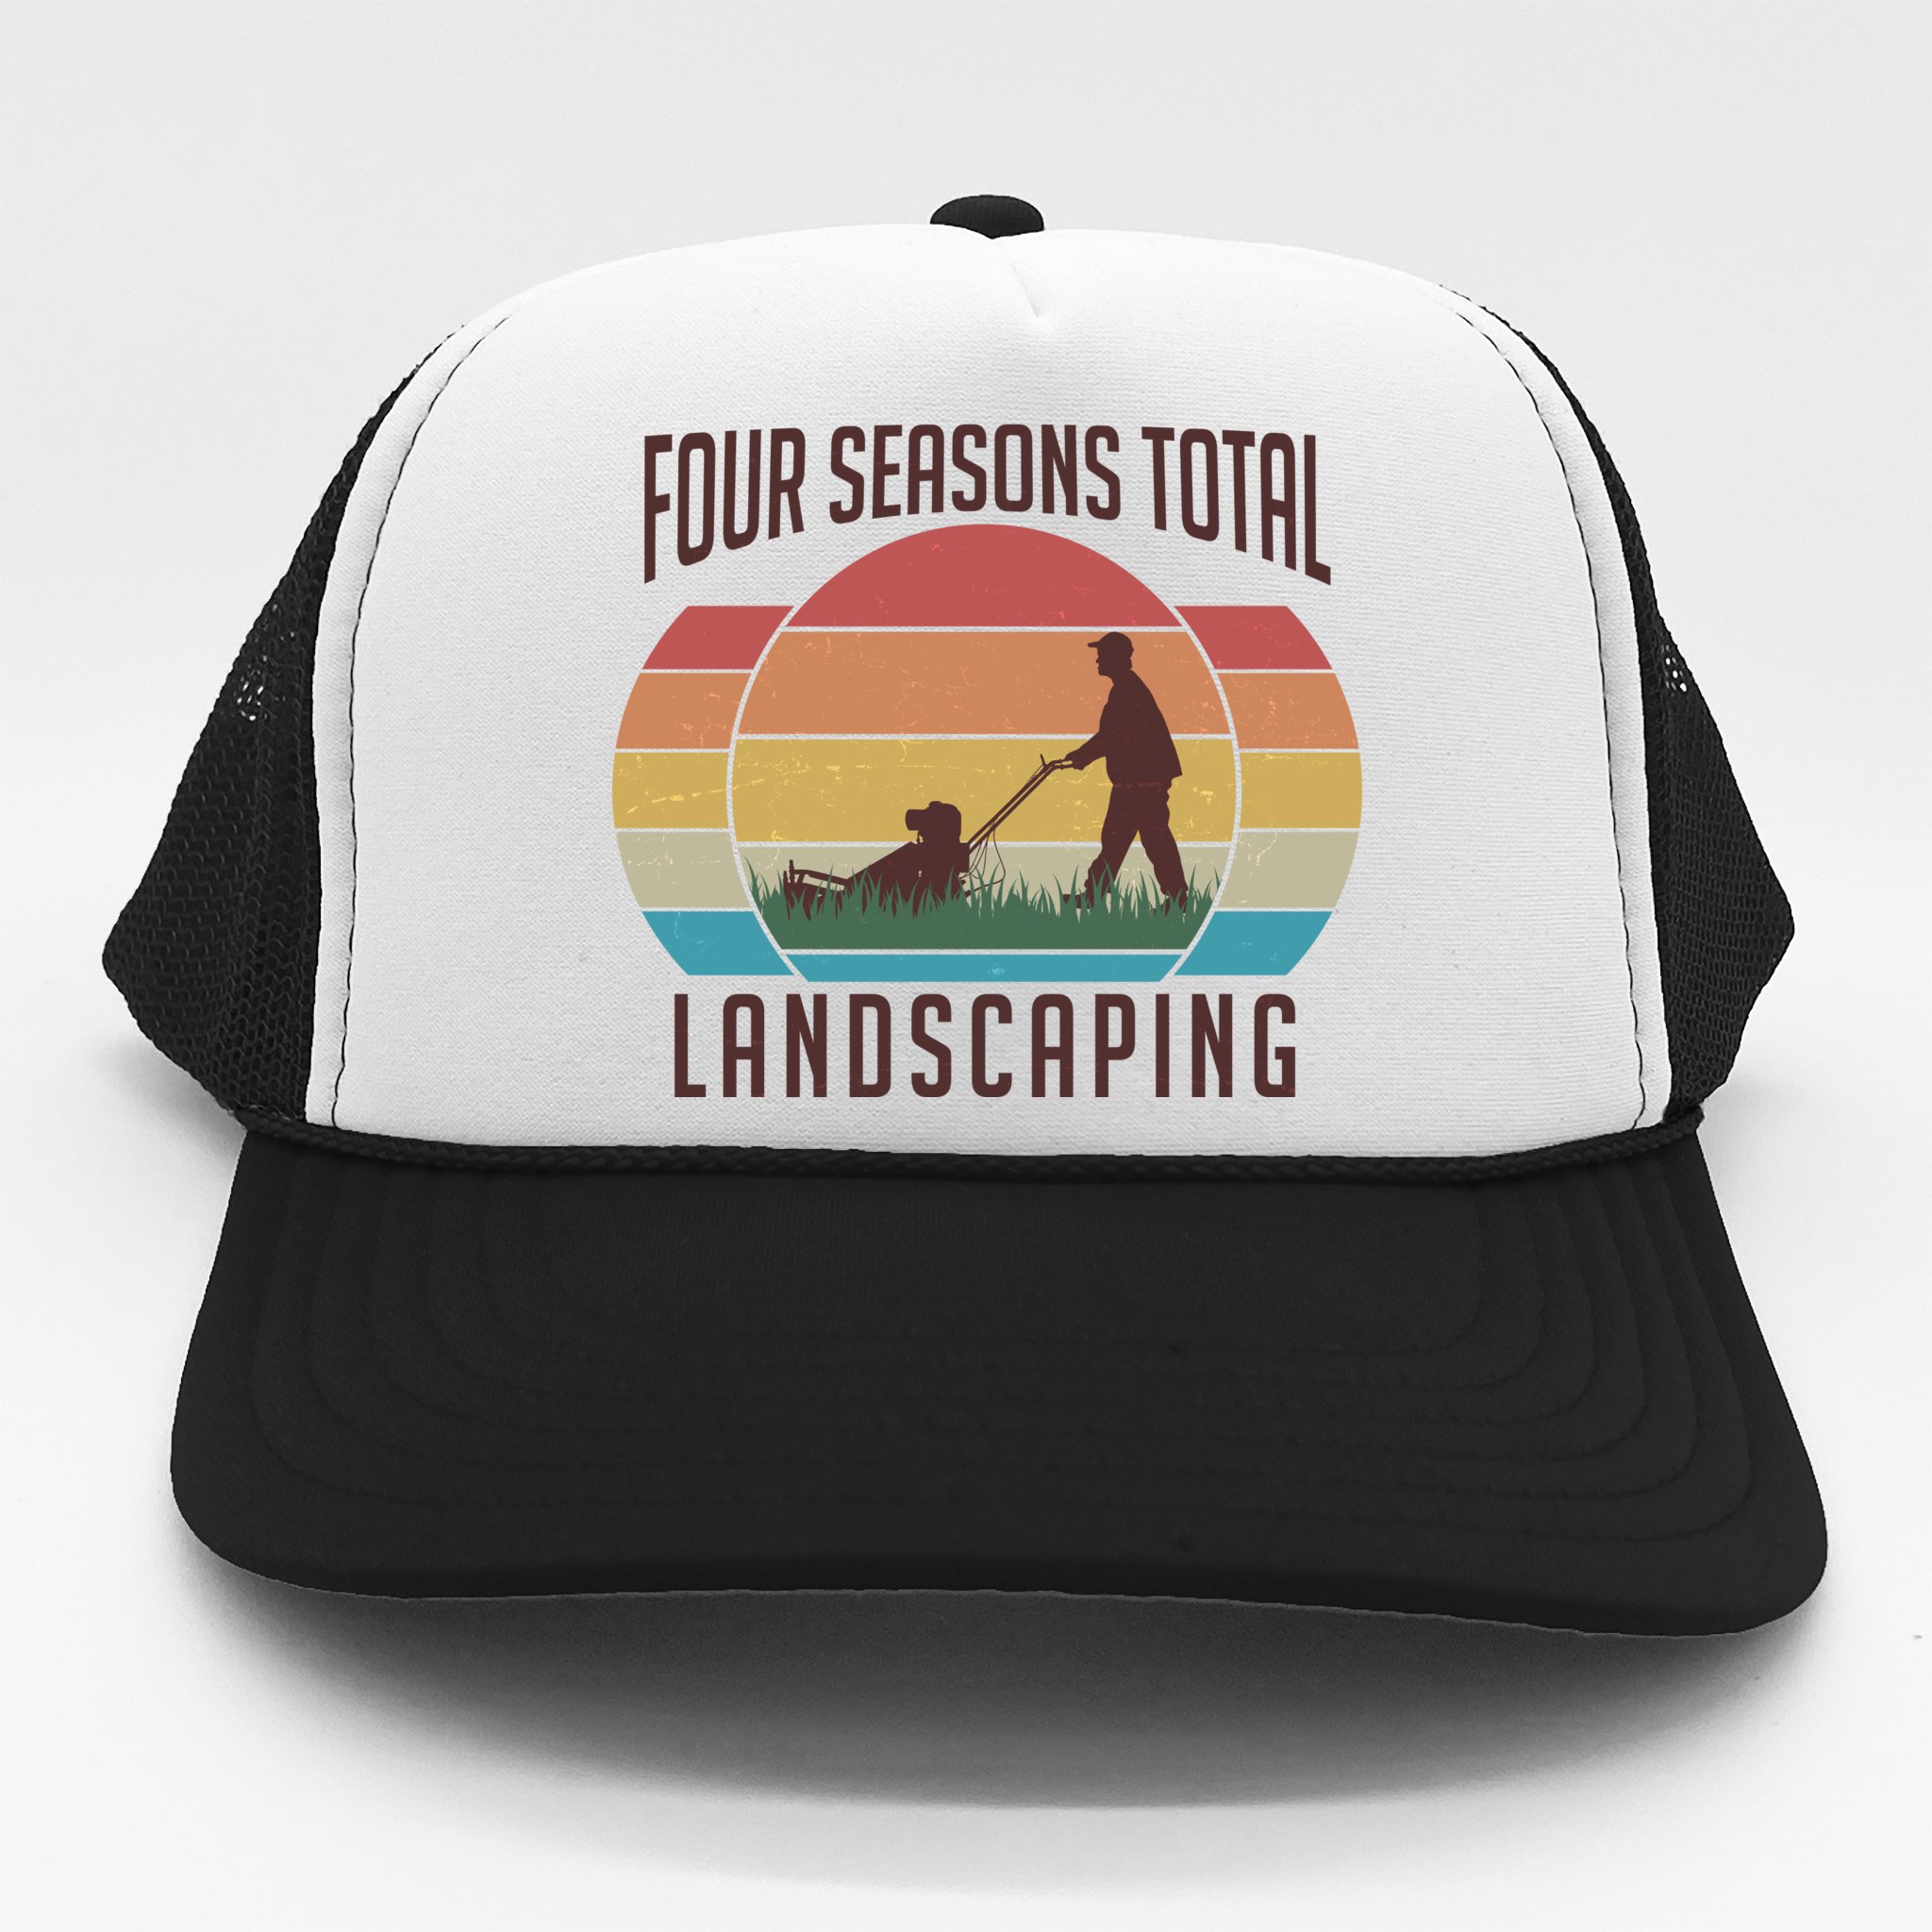 https://images3.teeshirtpalace.com/images/productImages/vintage-four-seasons-total-landscaping--black-th-garment.jpg